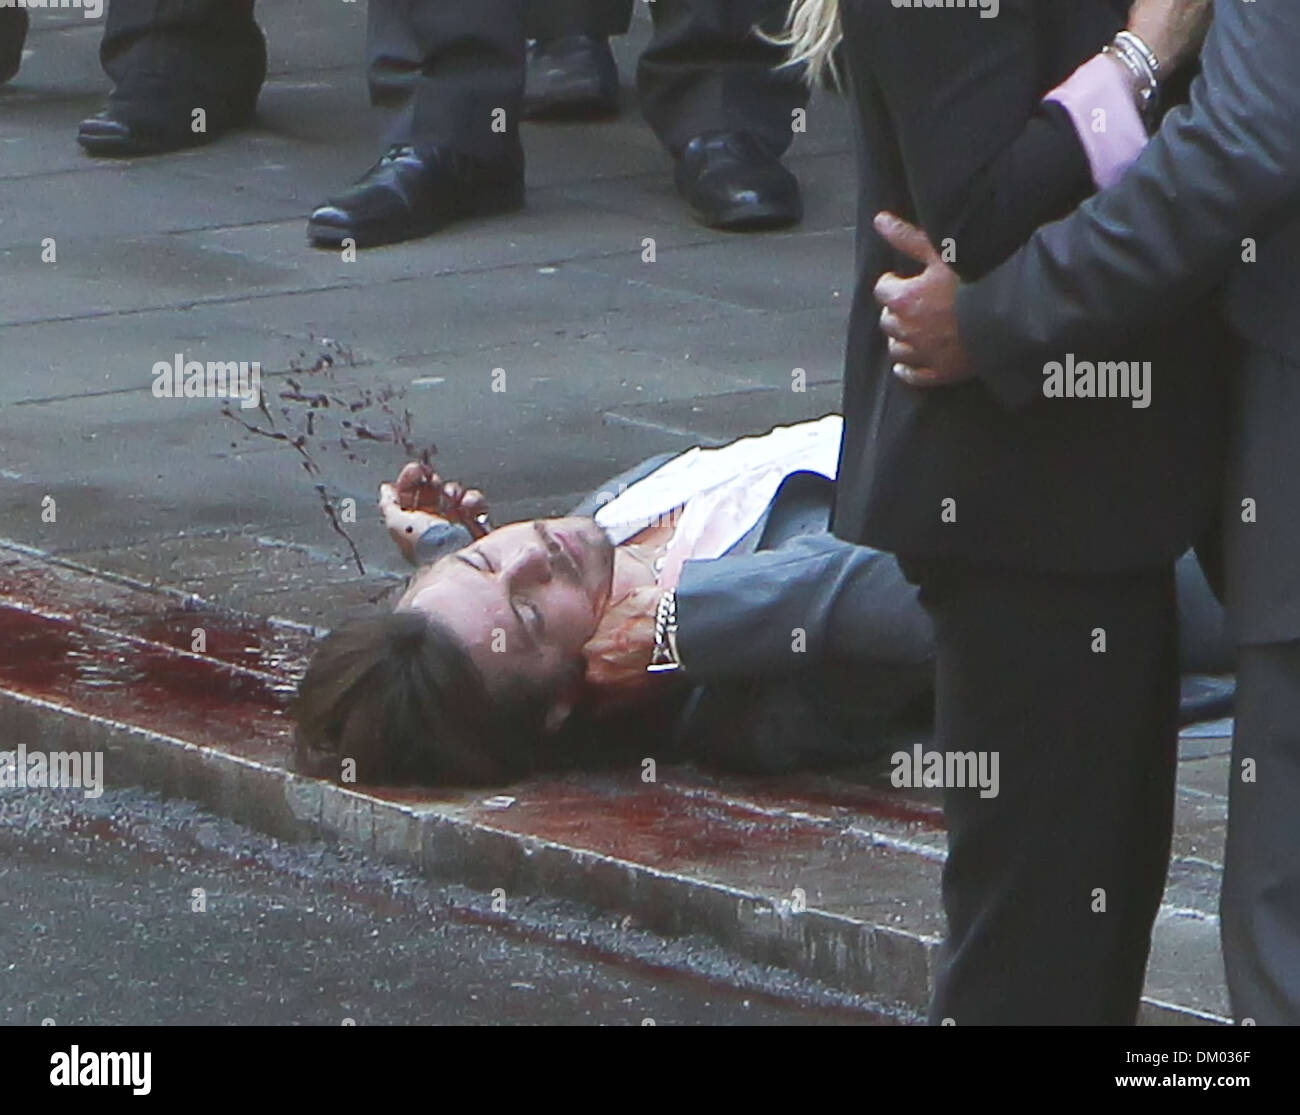 Brad Pitt's body double films a gruesome scene on set of new movie 'The Counselor' London England - 08.09.12 Stock Photo